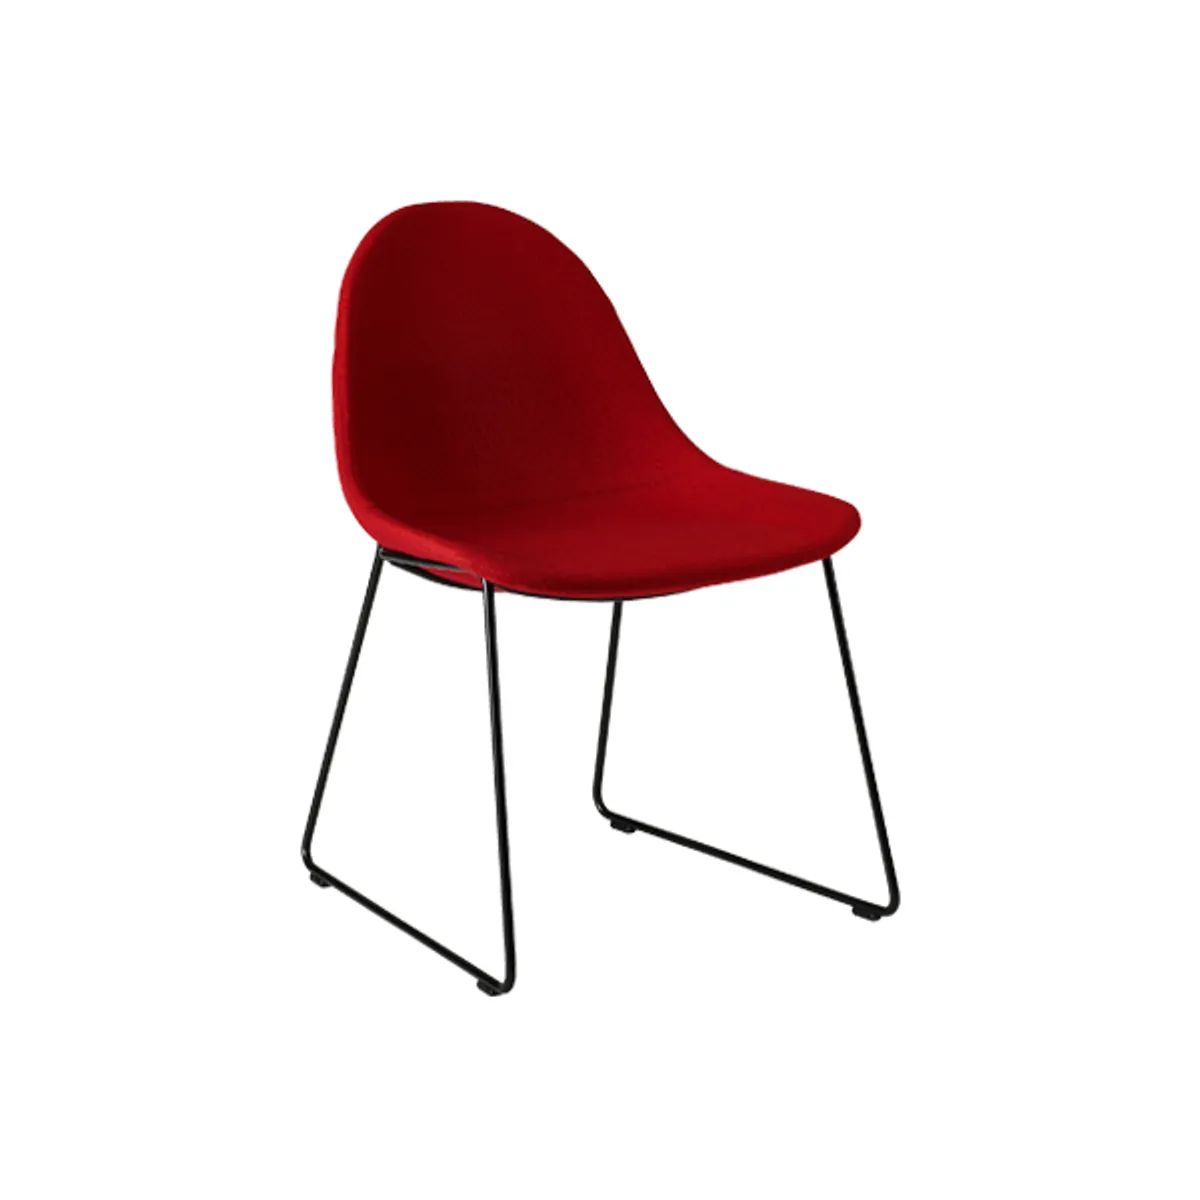 Atticus sled side chair Inside Out Contracts3 copy